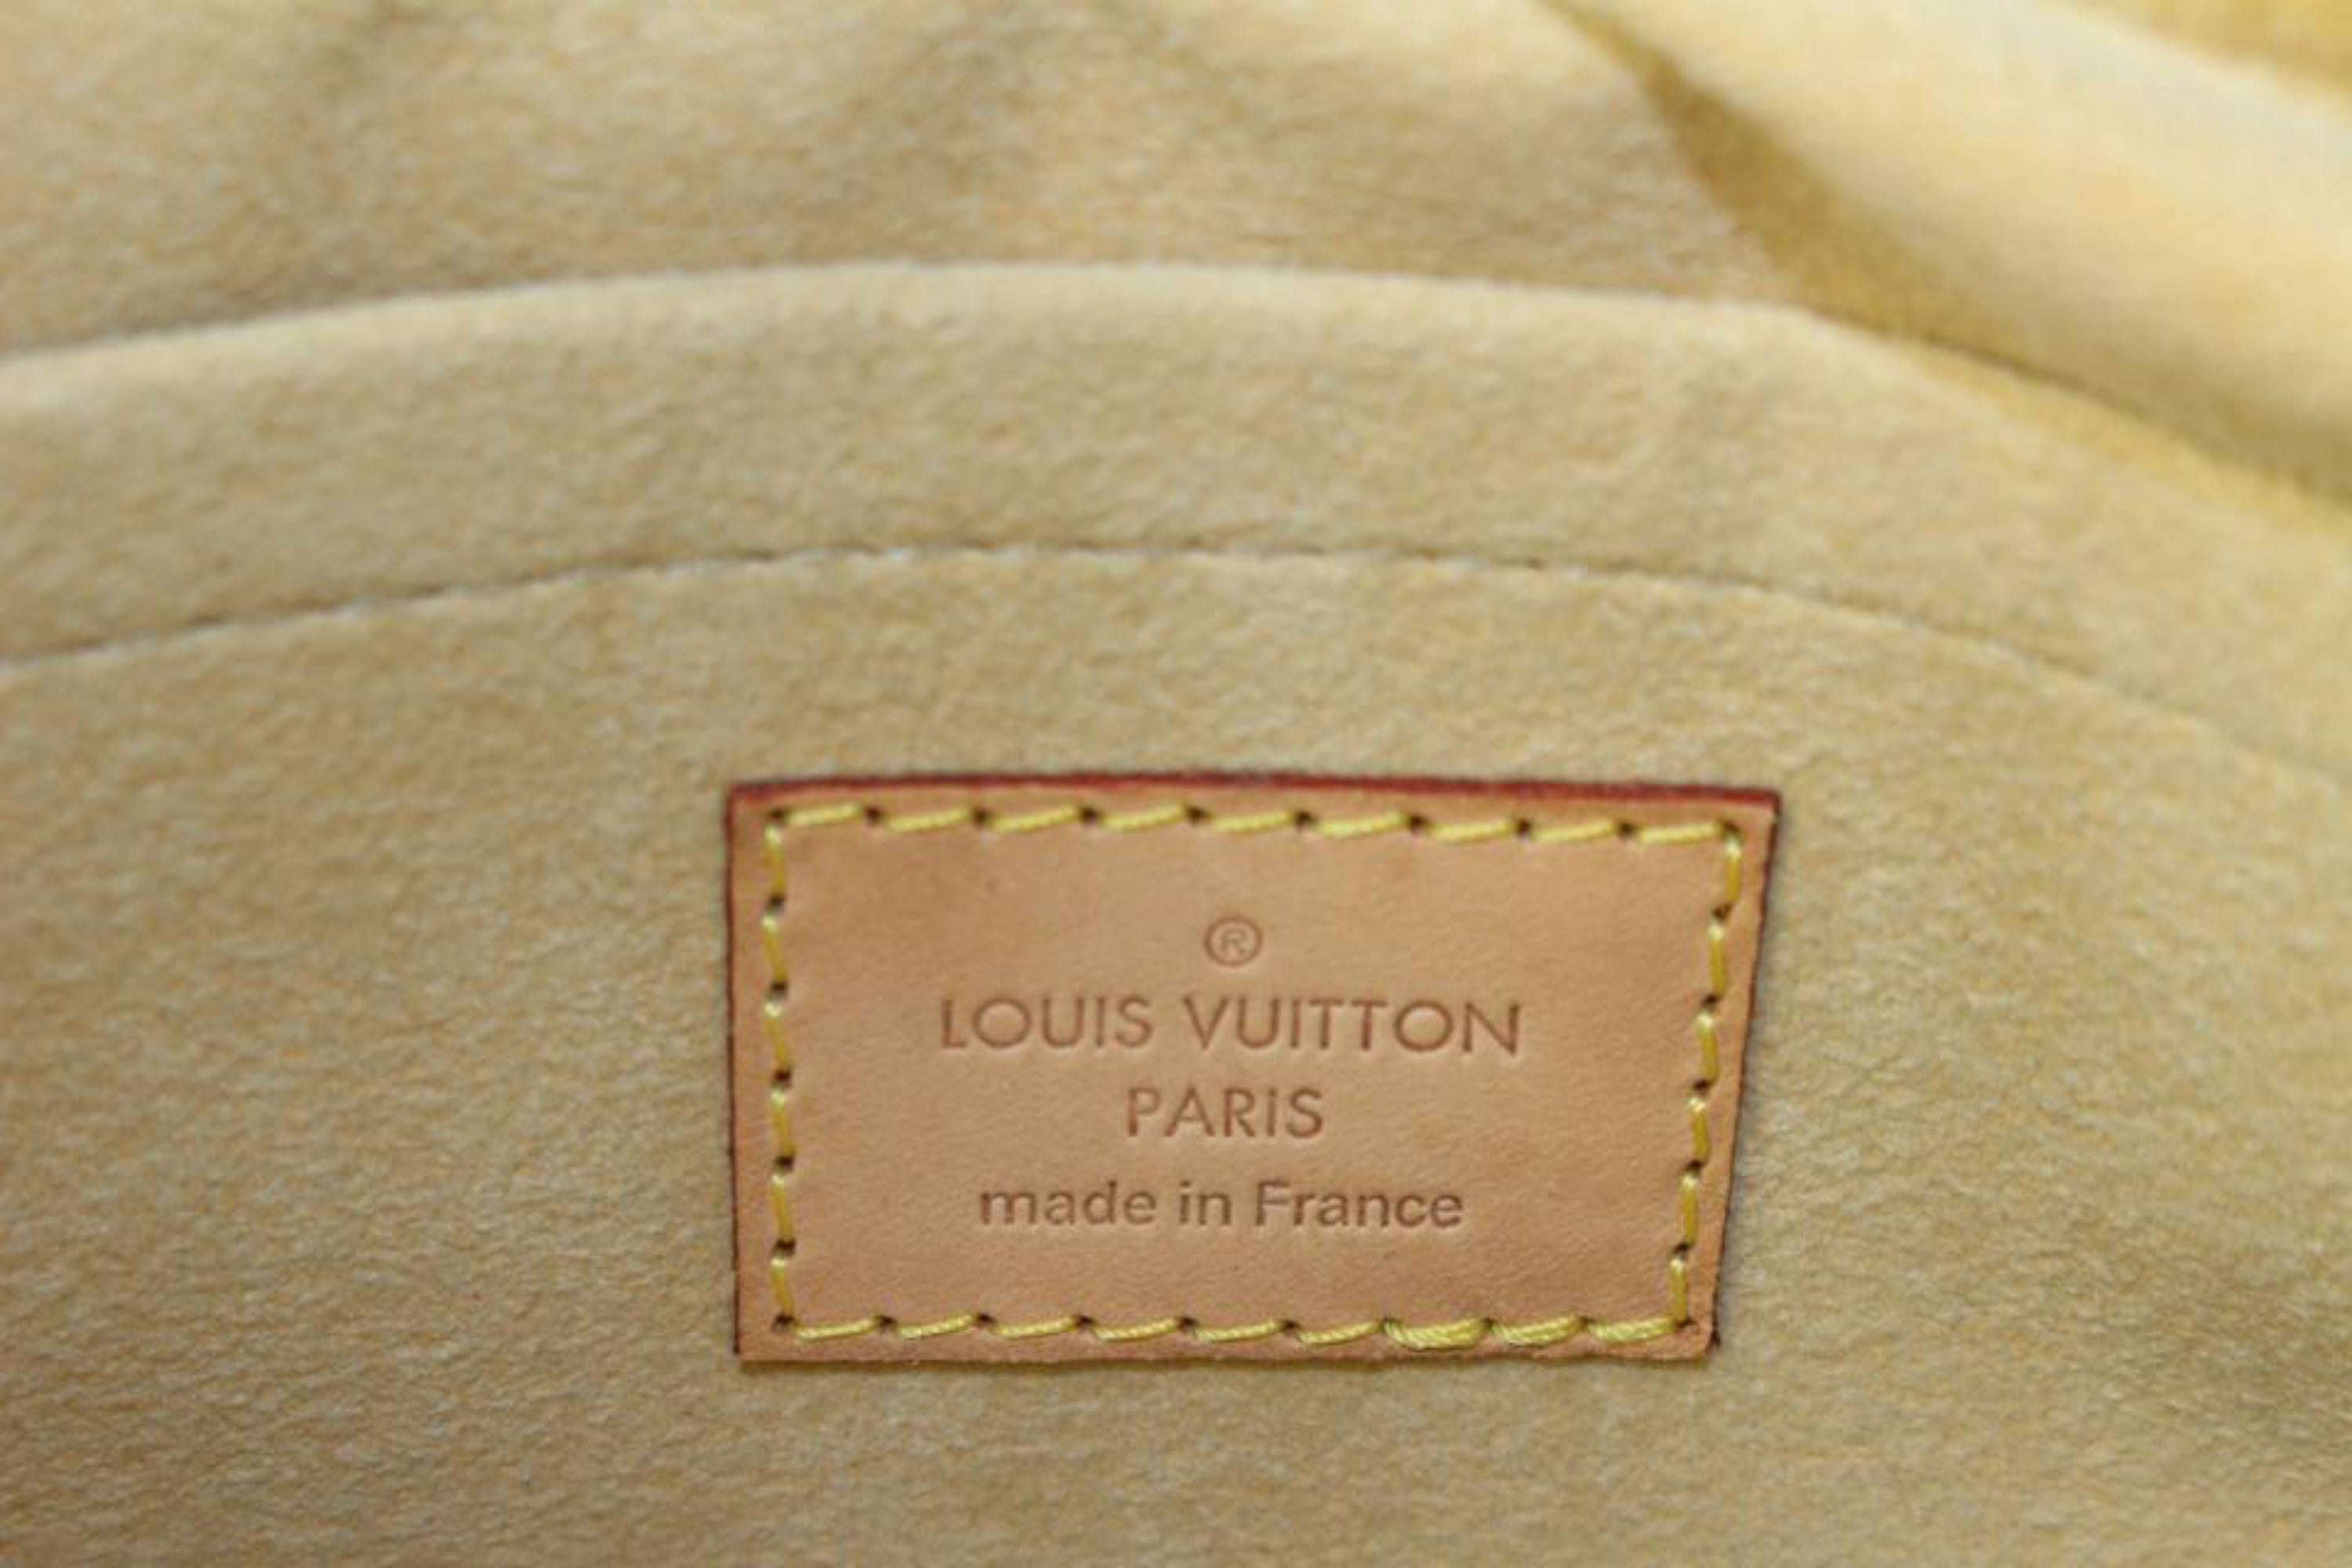 Louis Vuitton Limited Edition Quilted Monogram Etoile City PM Hobo Bag 21lk830s 2